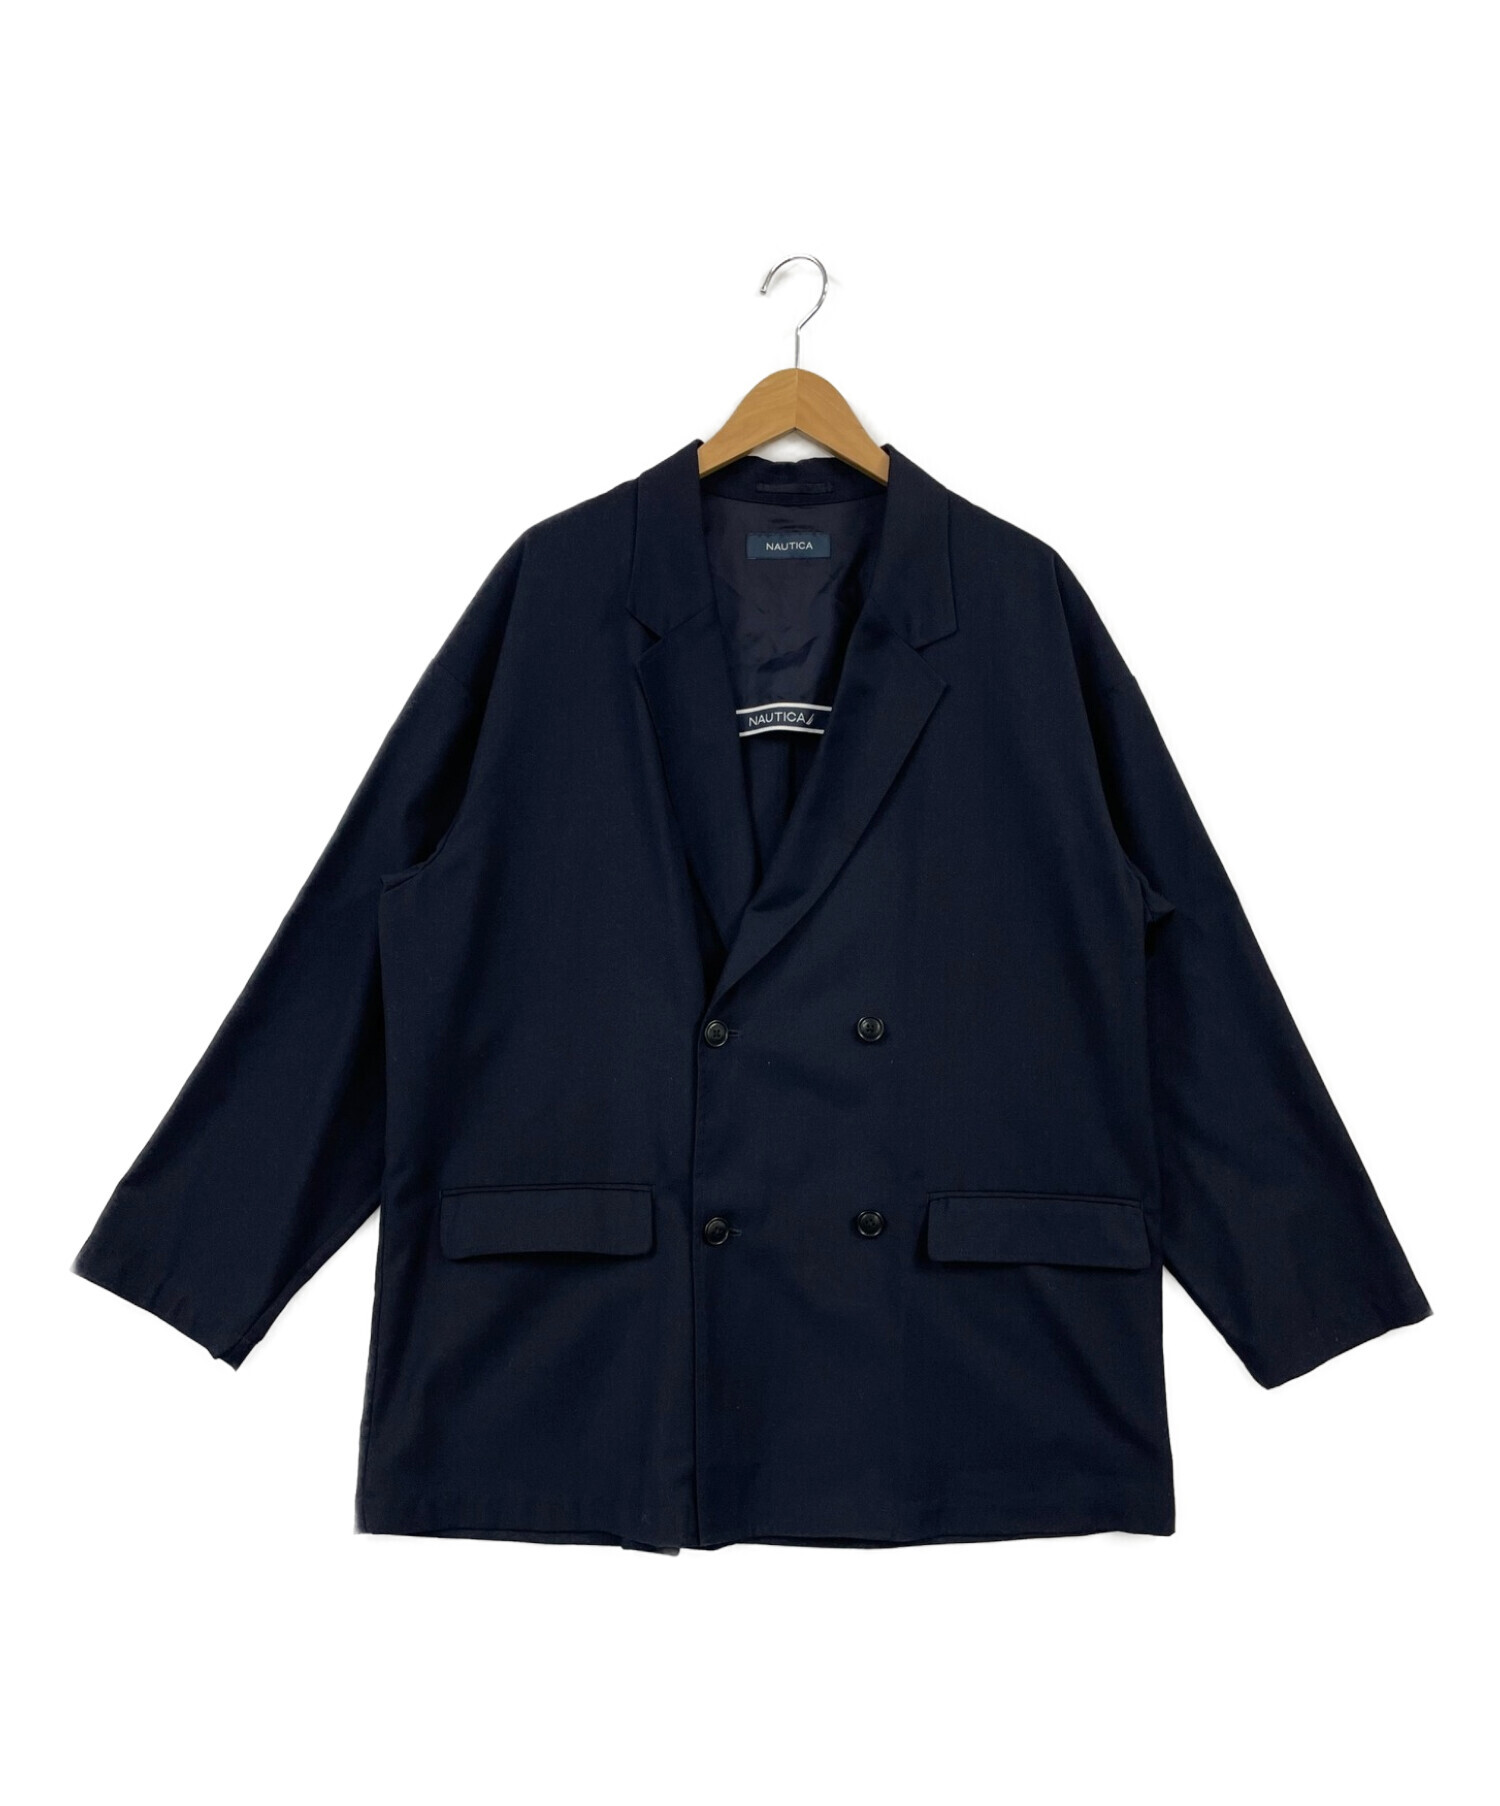 NAUTICA (ノーティカ) Relaxed TR Double Breasted Jacket ネイビー サイズ:L